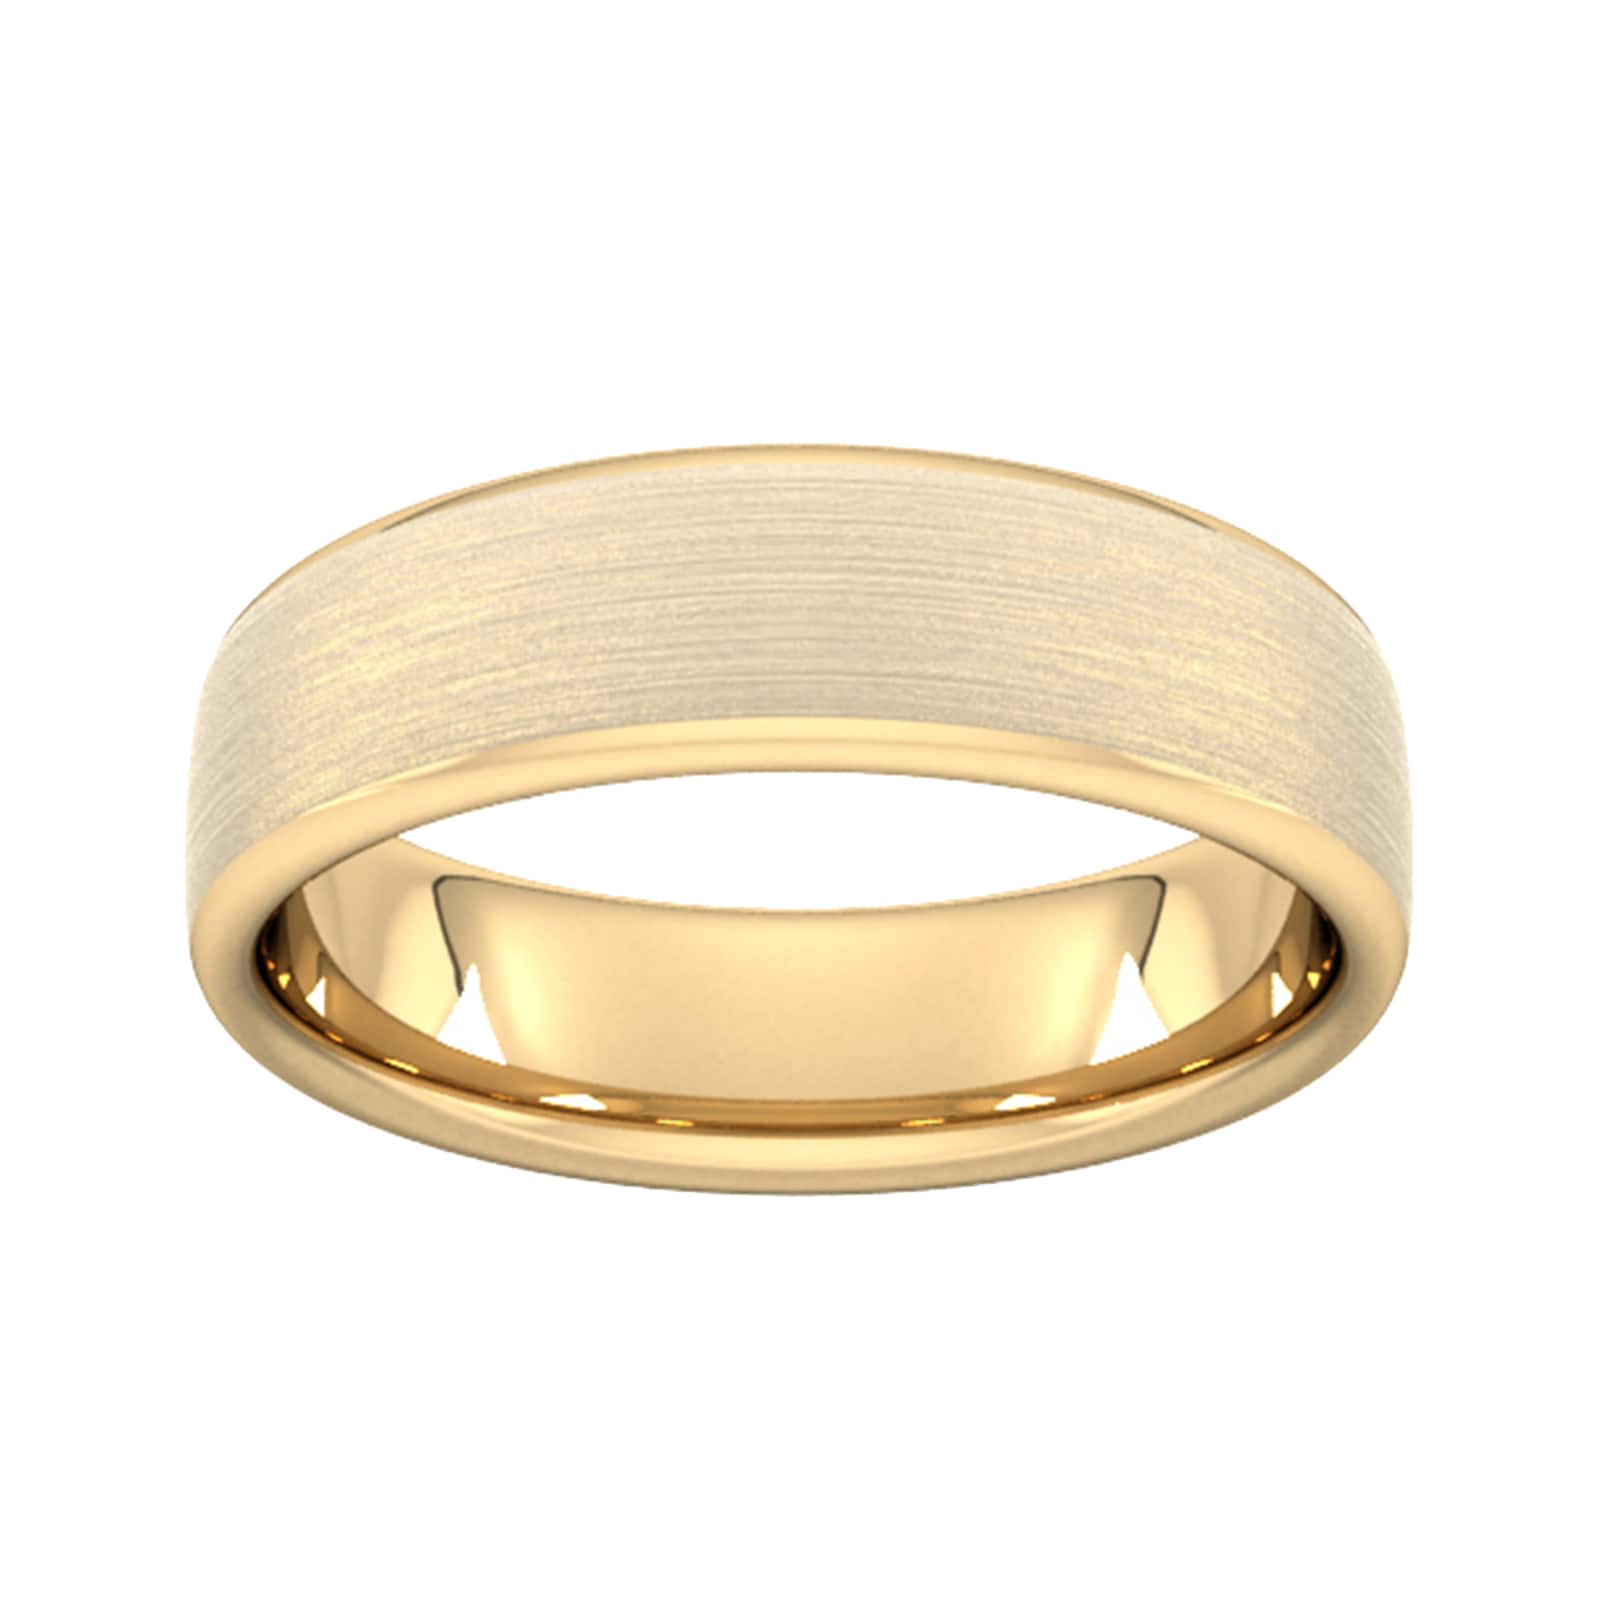 6mm D Shape Heavy Matt Finished Wedding Ring In 9 Carat Yellow Gold - Ring Size P